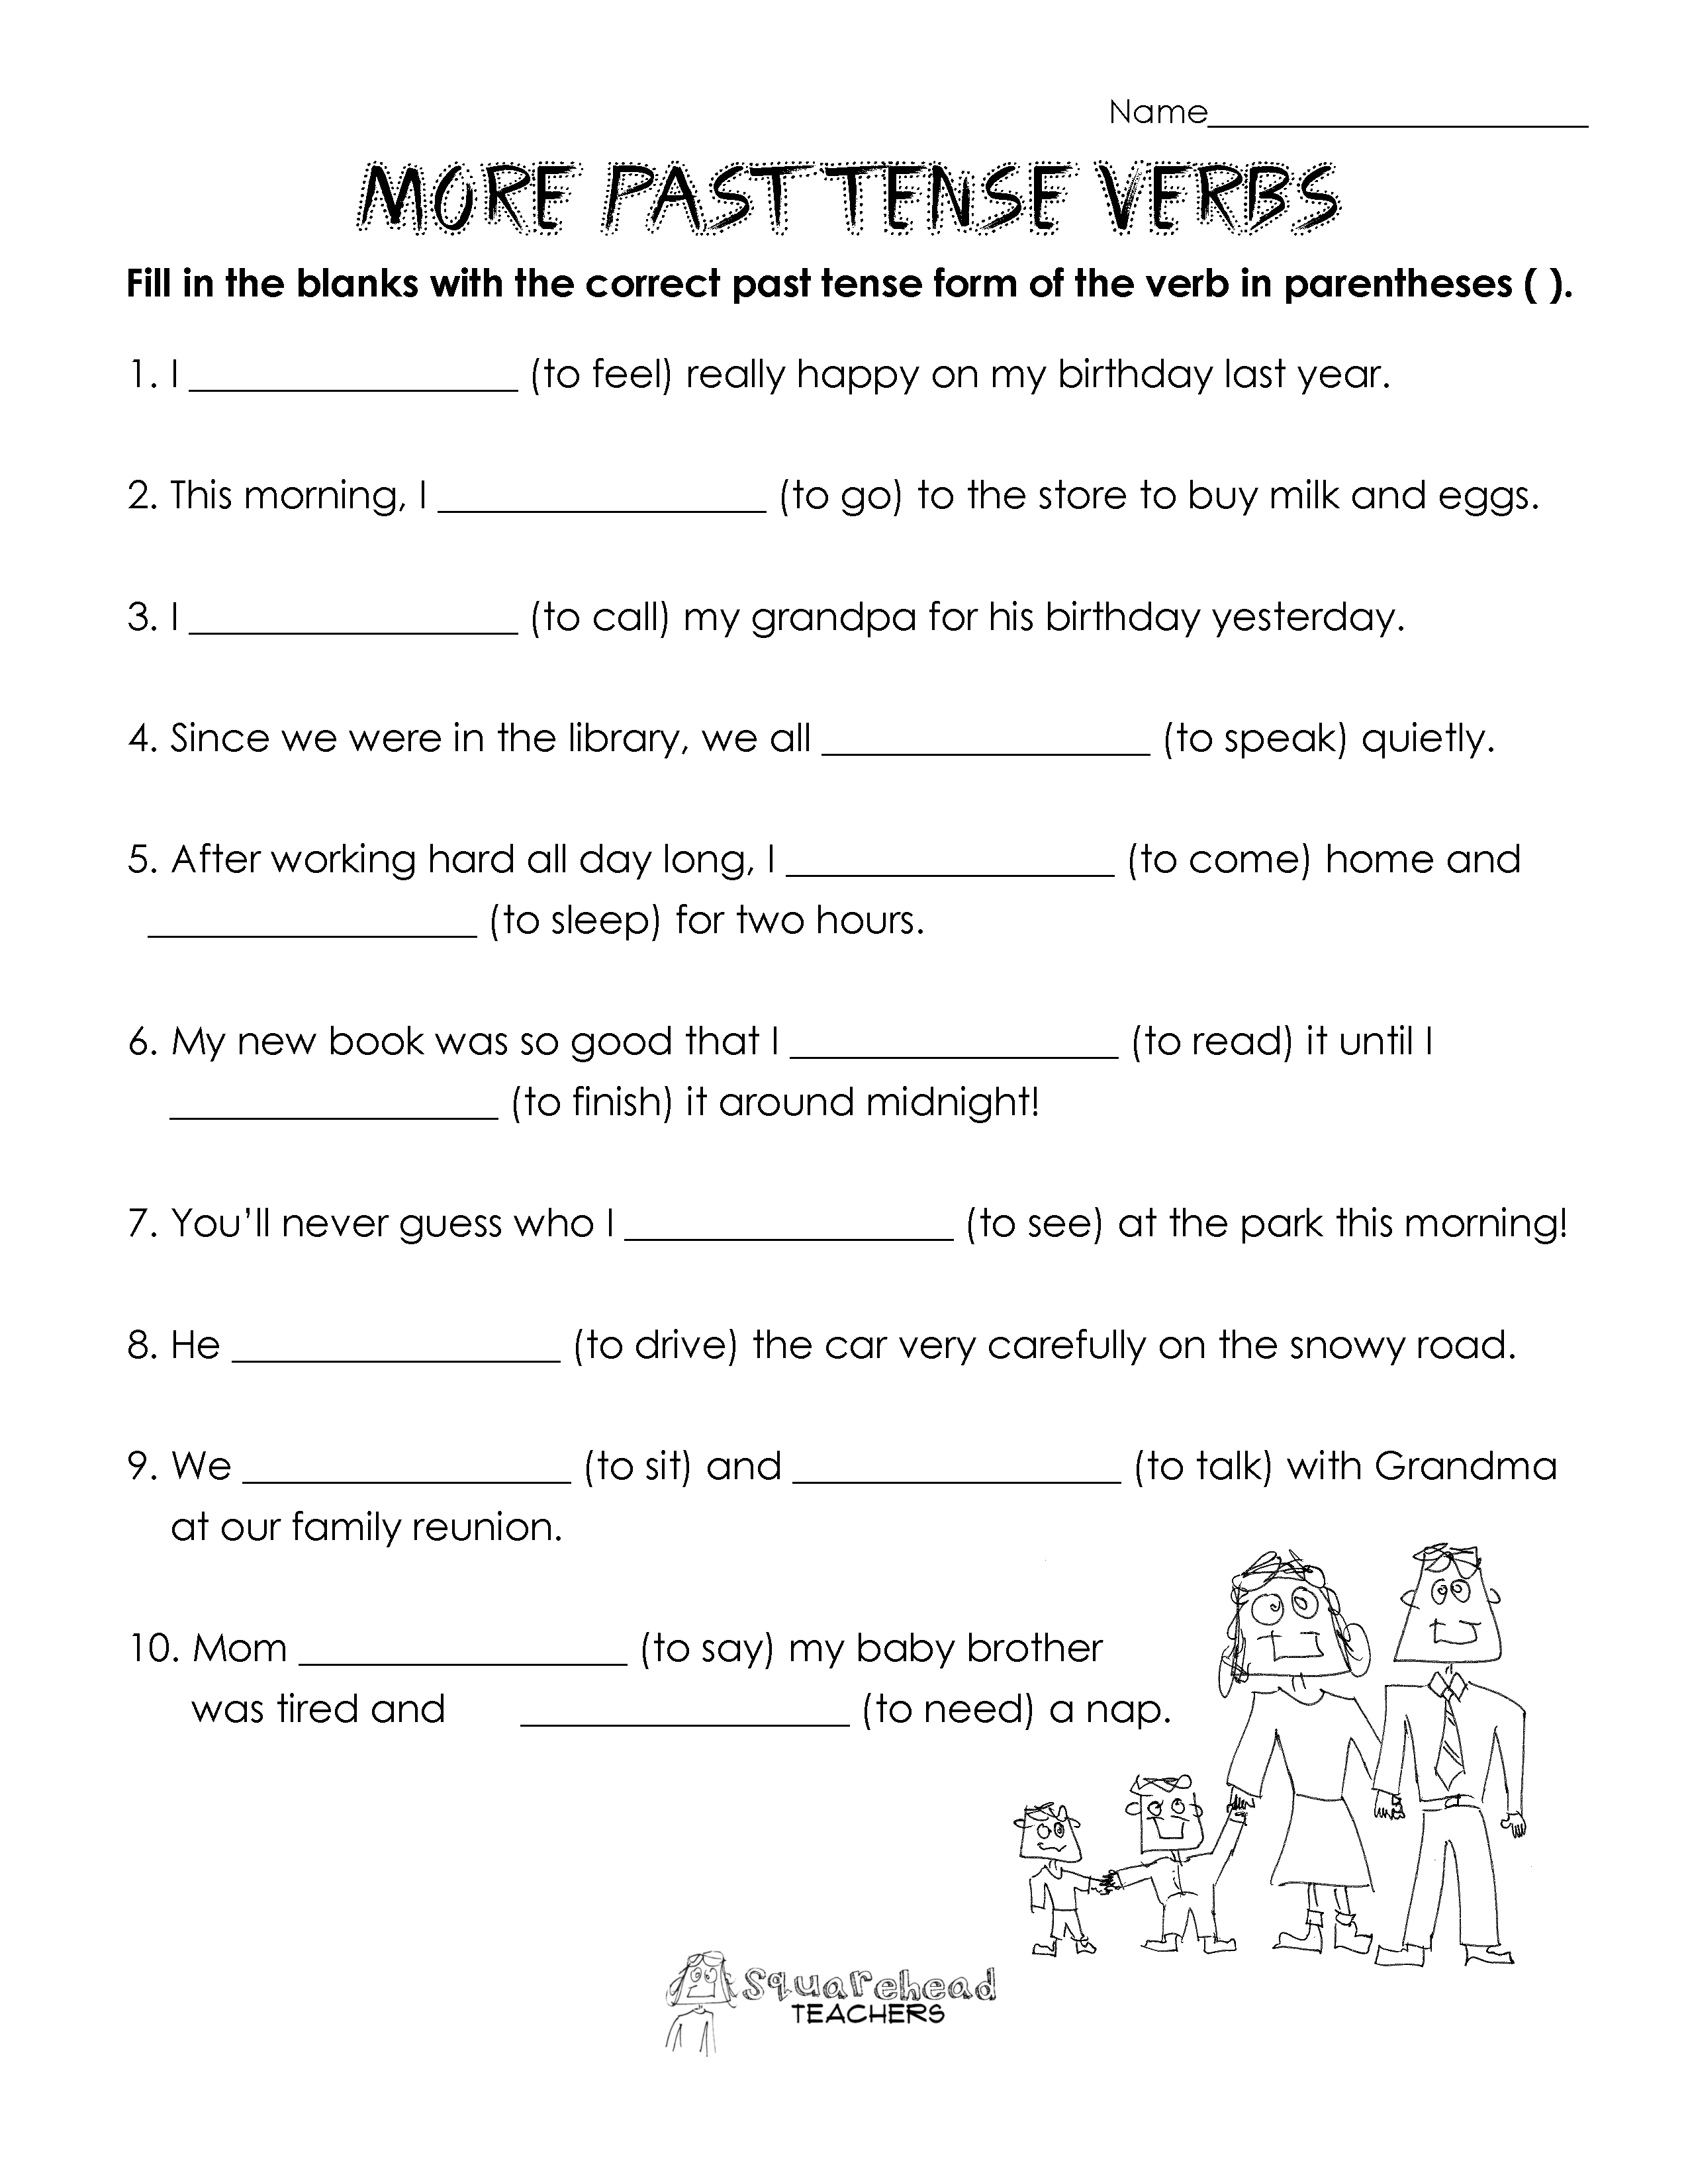 Worksheet On Simple Past Tense For Class 6